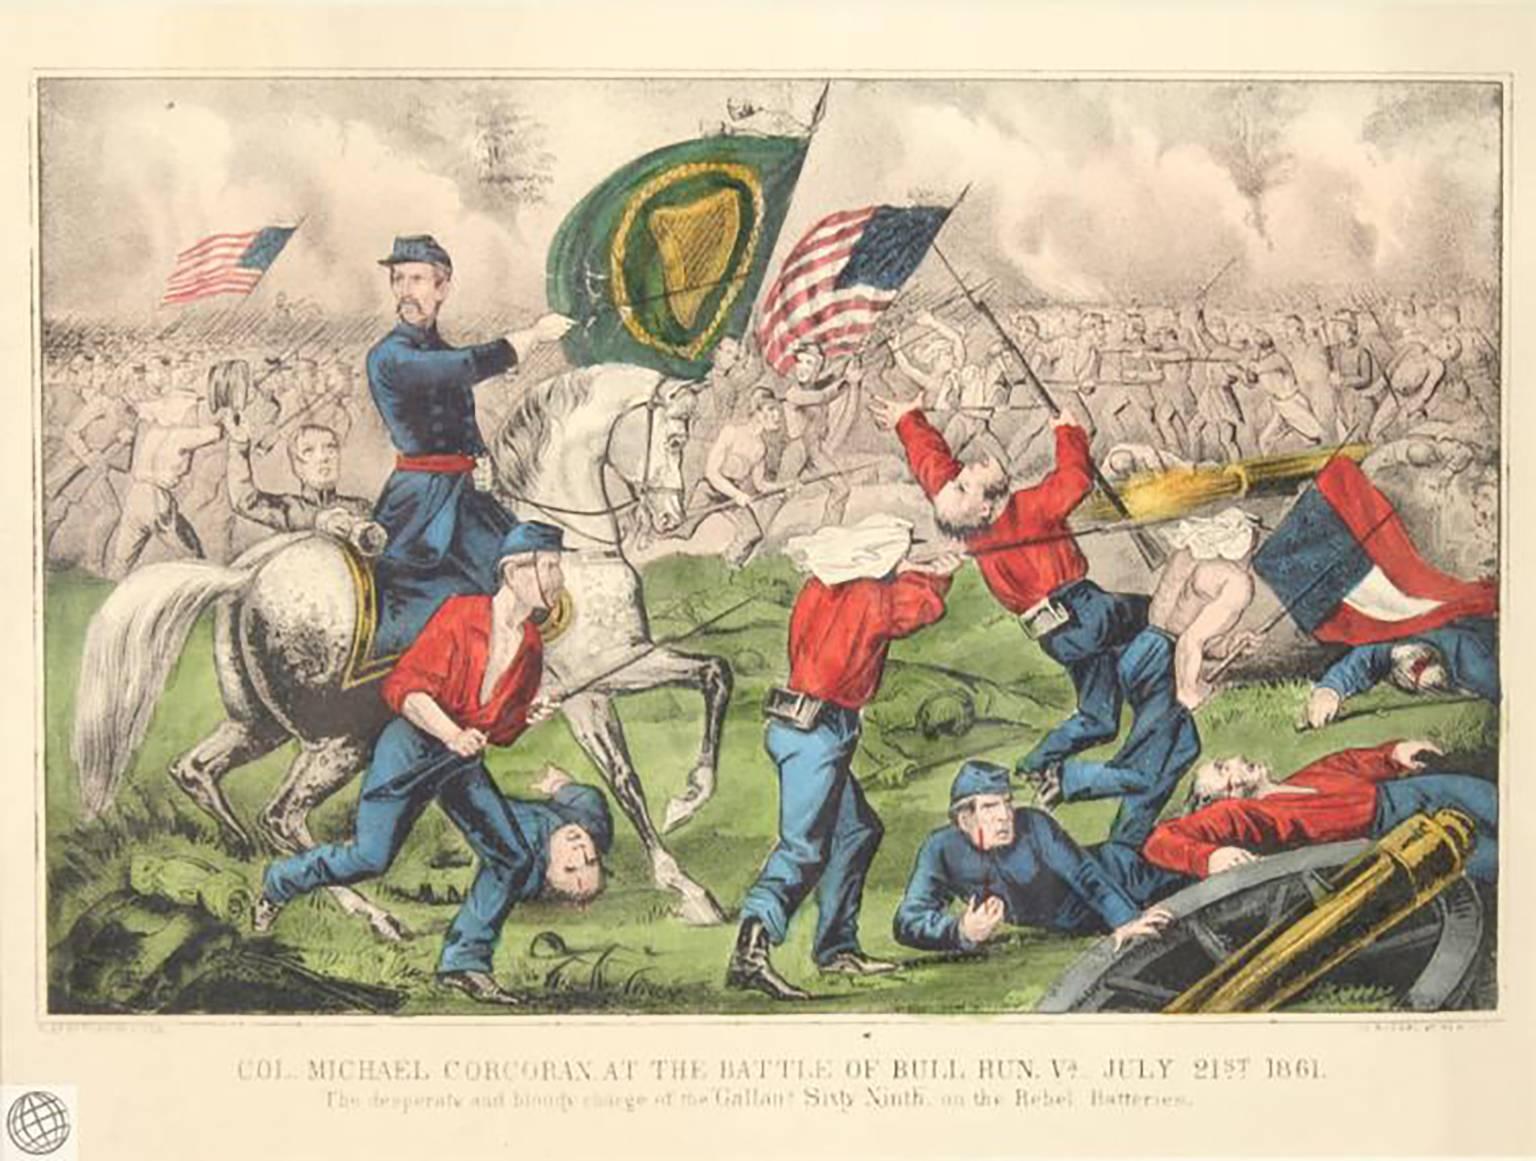 Extraordinary Antique Currier & Ives Hand Colored Civil War Lithograph  Entitled “Col. Michael Corcoran at the Battle of Bull Run, Va. – July 21st 1861 : The desperate and bloody charge of the ‘Gallant Sixty-Ninth,’ on the Rebel Batteries”  This is